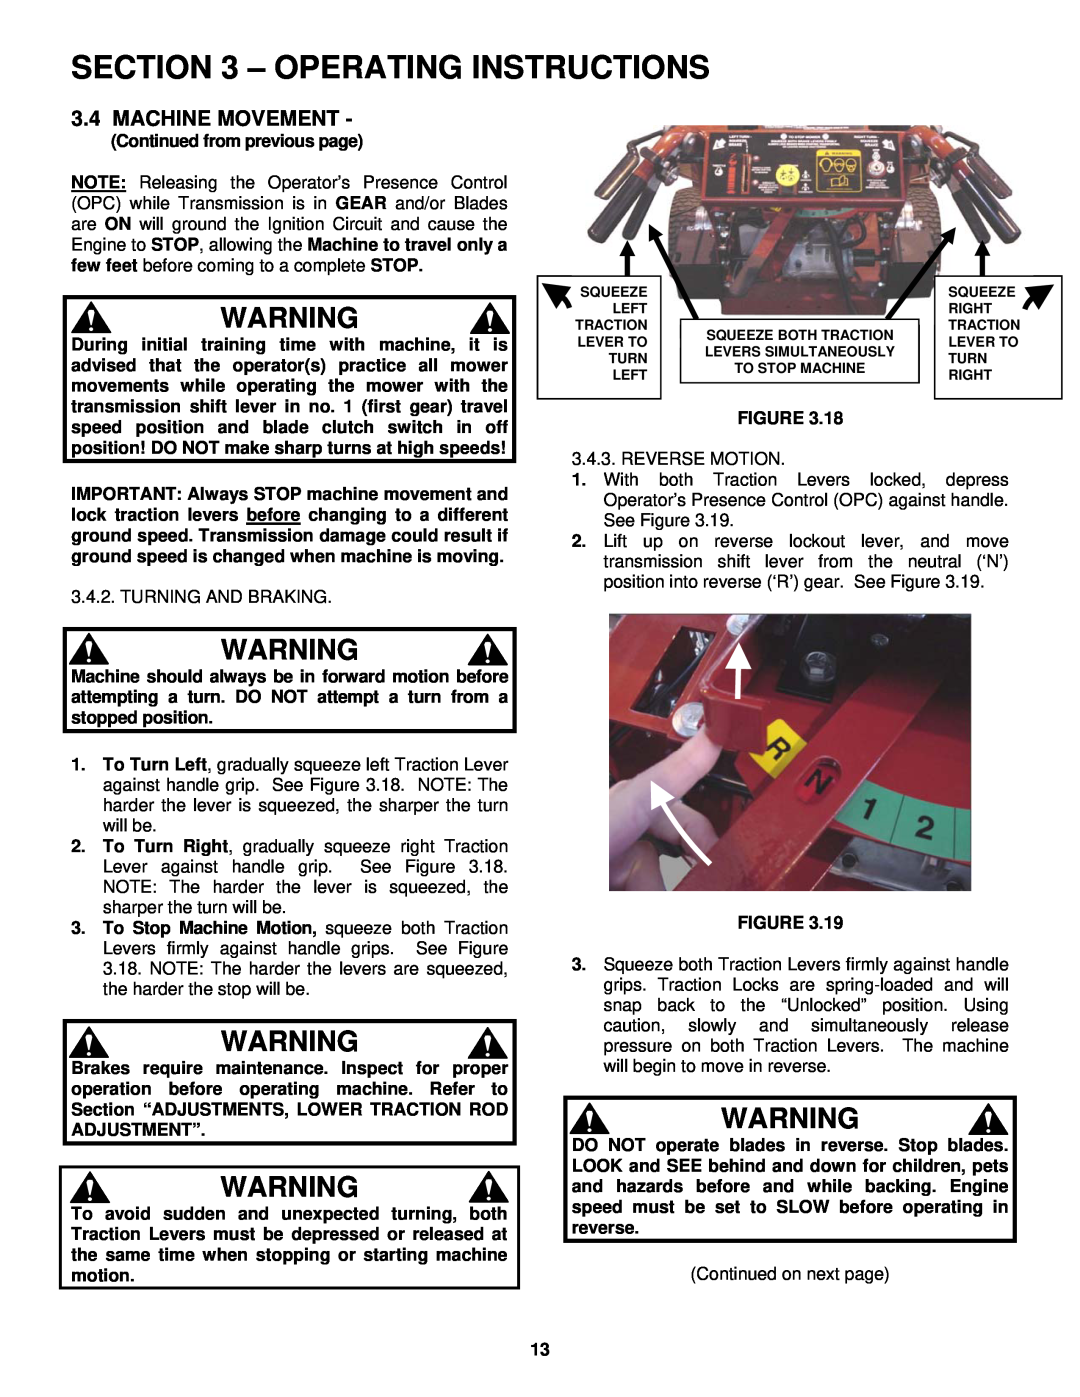 Snapper SGV13321KW important safety instructions Operating Instructions, Machine Movement, Continued from previous page 